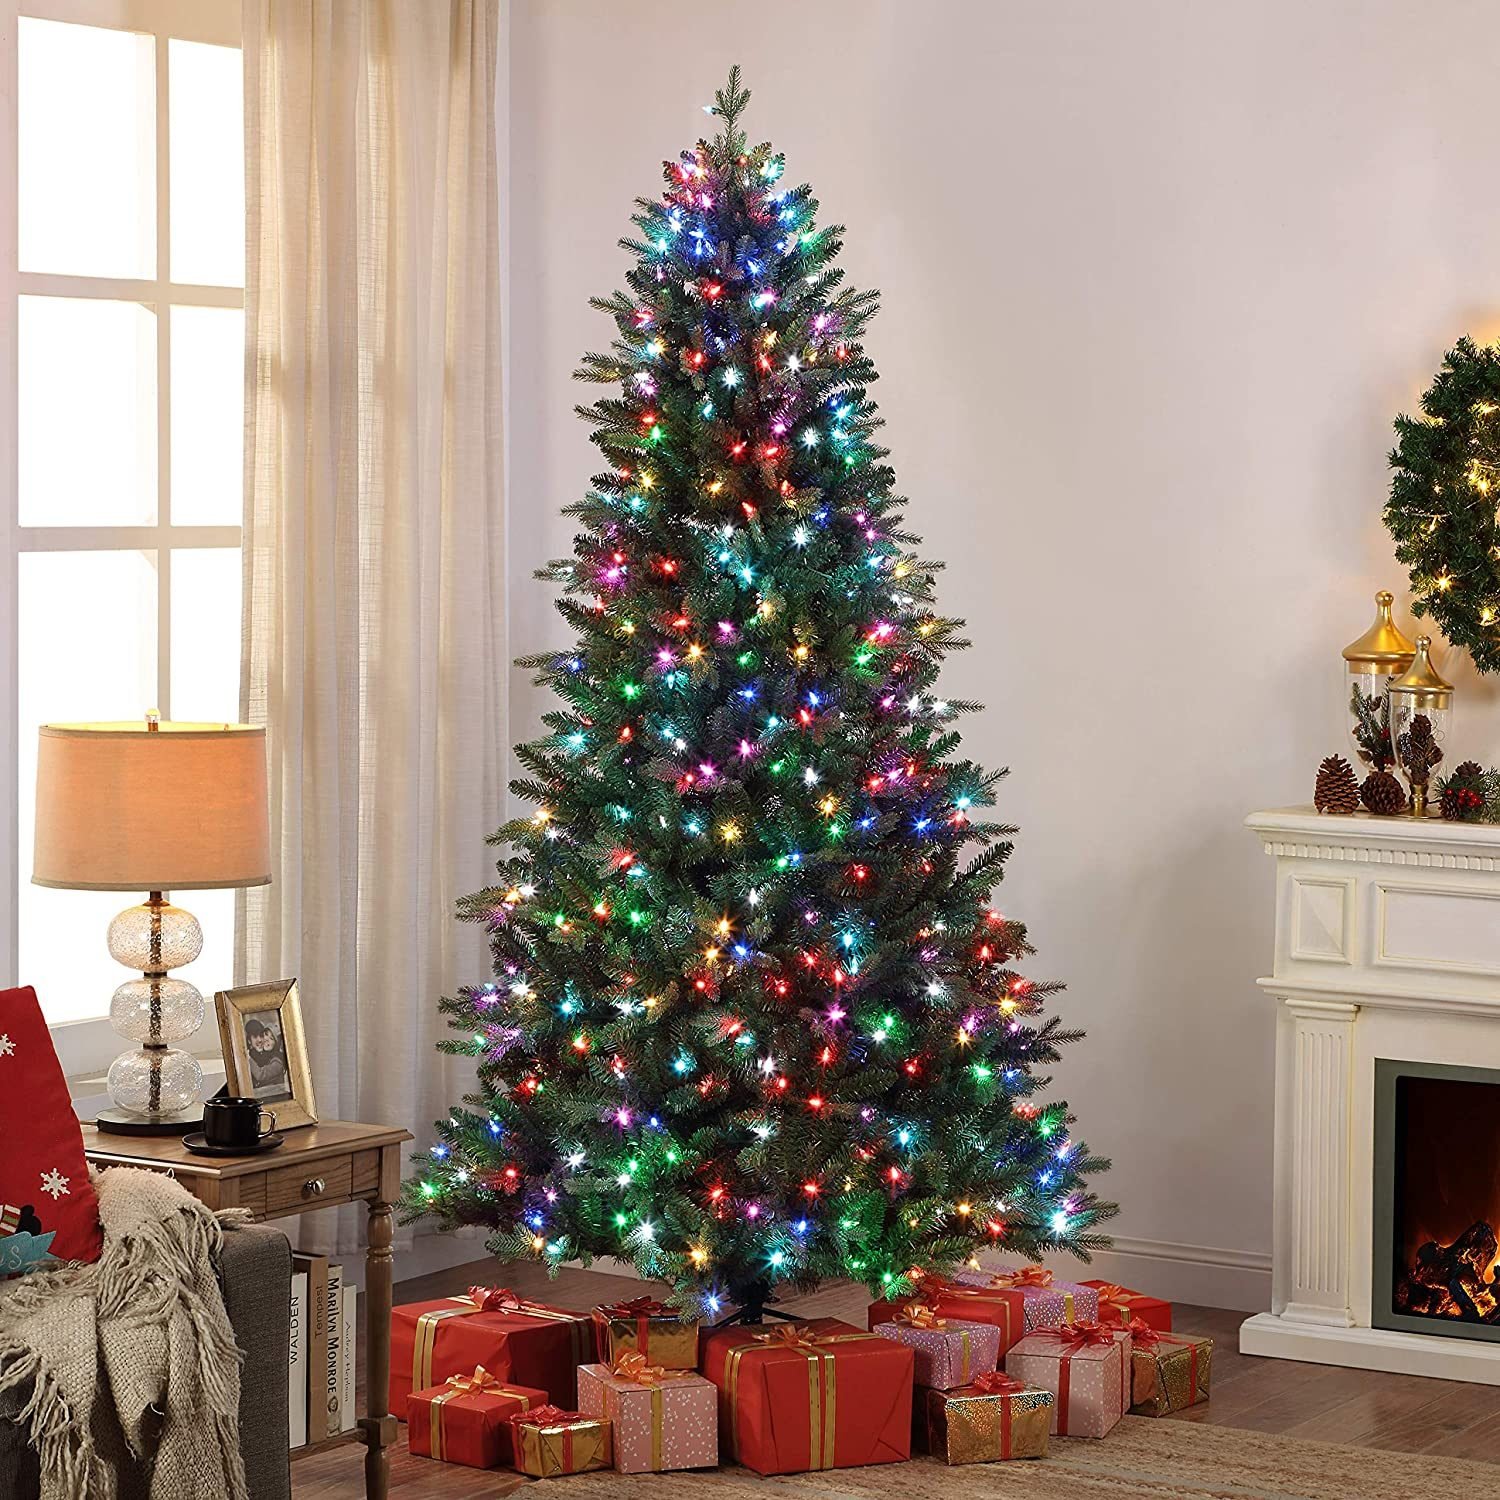 The 8 Best Smart Christmas Trees for a Holly, Jolly and Easy Holiday